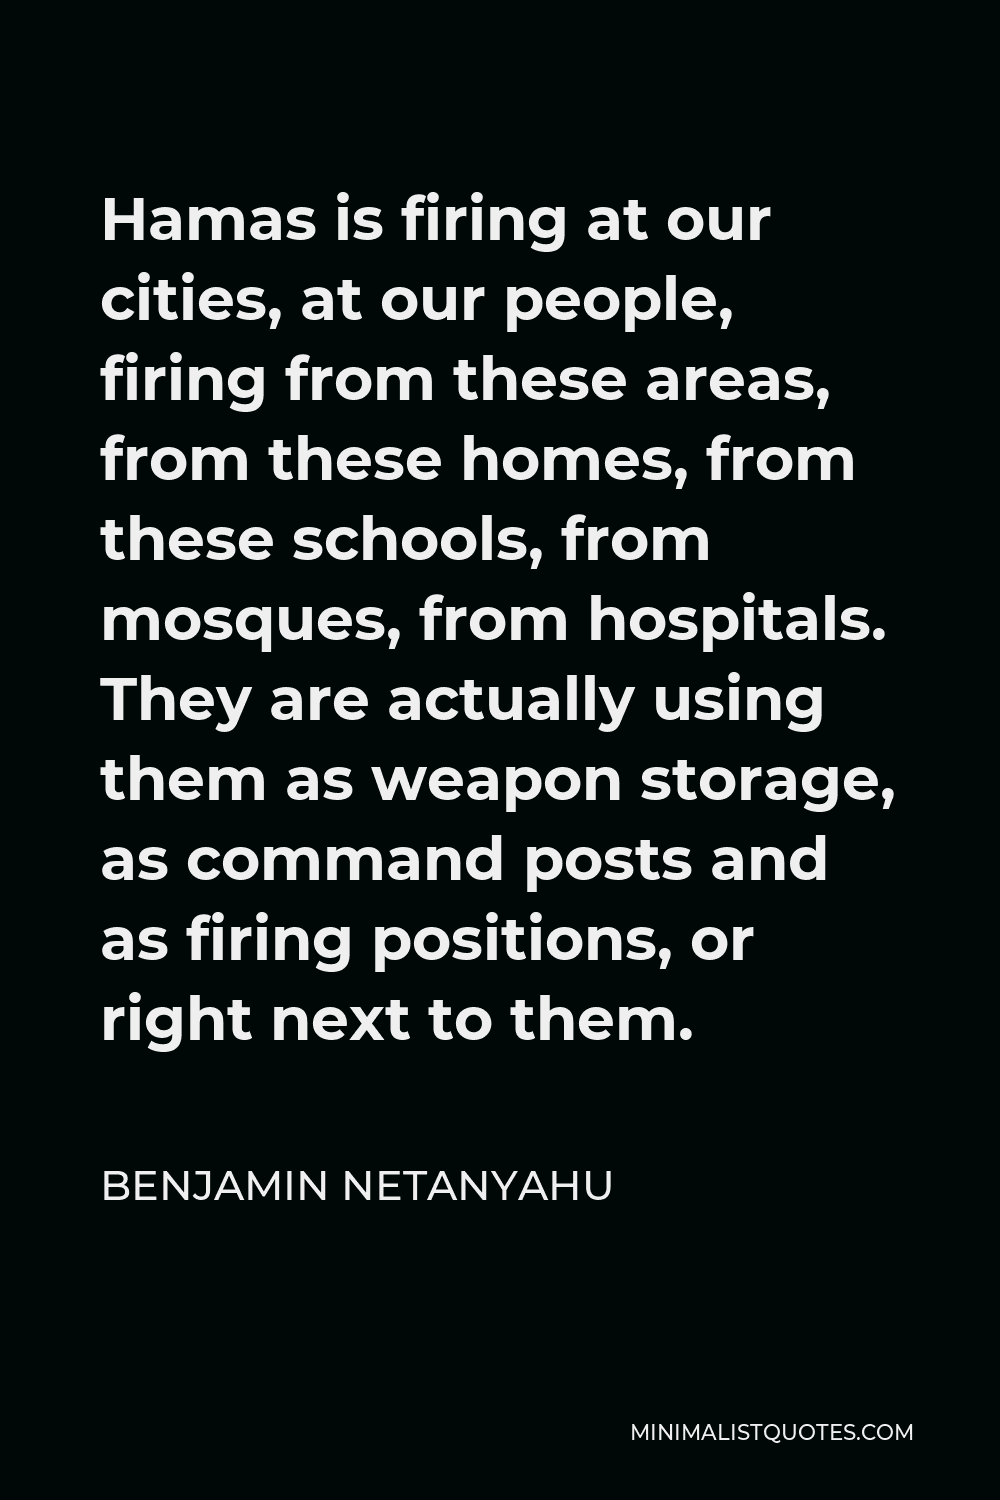 Benjamin Netanyahu Quote - Hamas is firing at our cities, at our people, firing from these areas, from these homes, from these schools, from mosques, from hospitals. They are actually using them as weapon storage, as command posts and as firing positions, or right next to them.